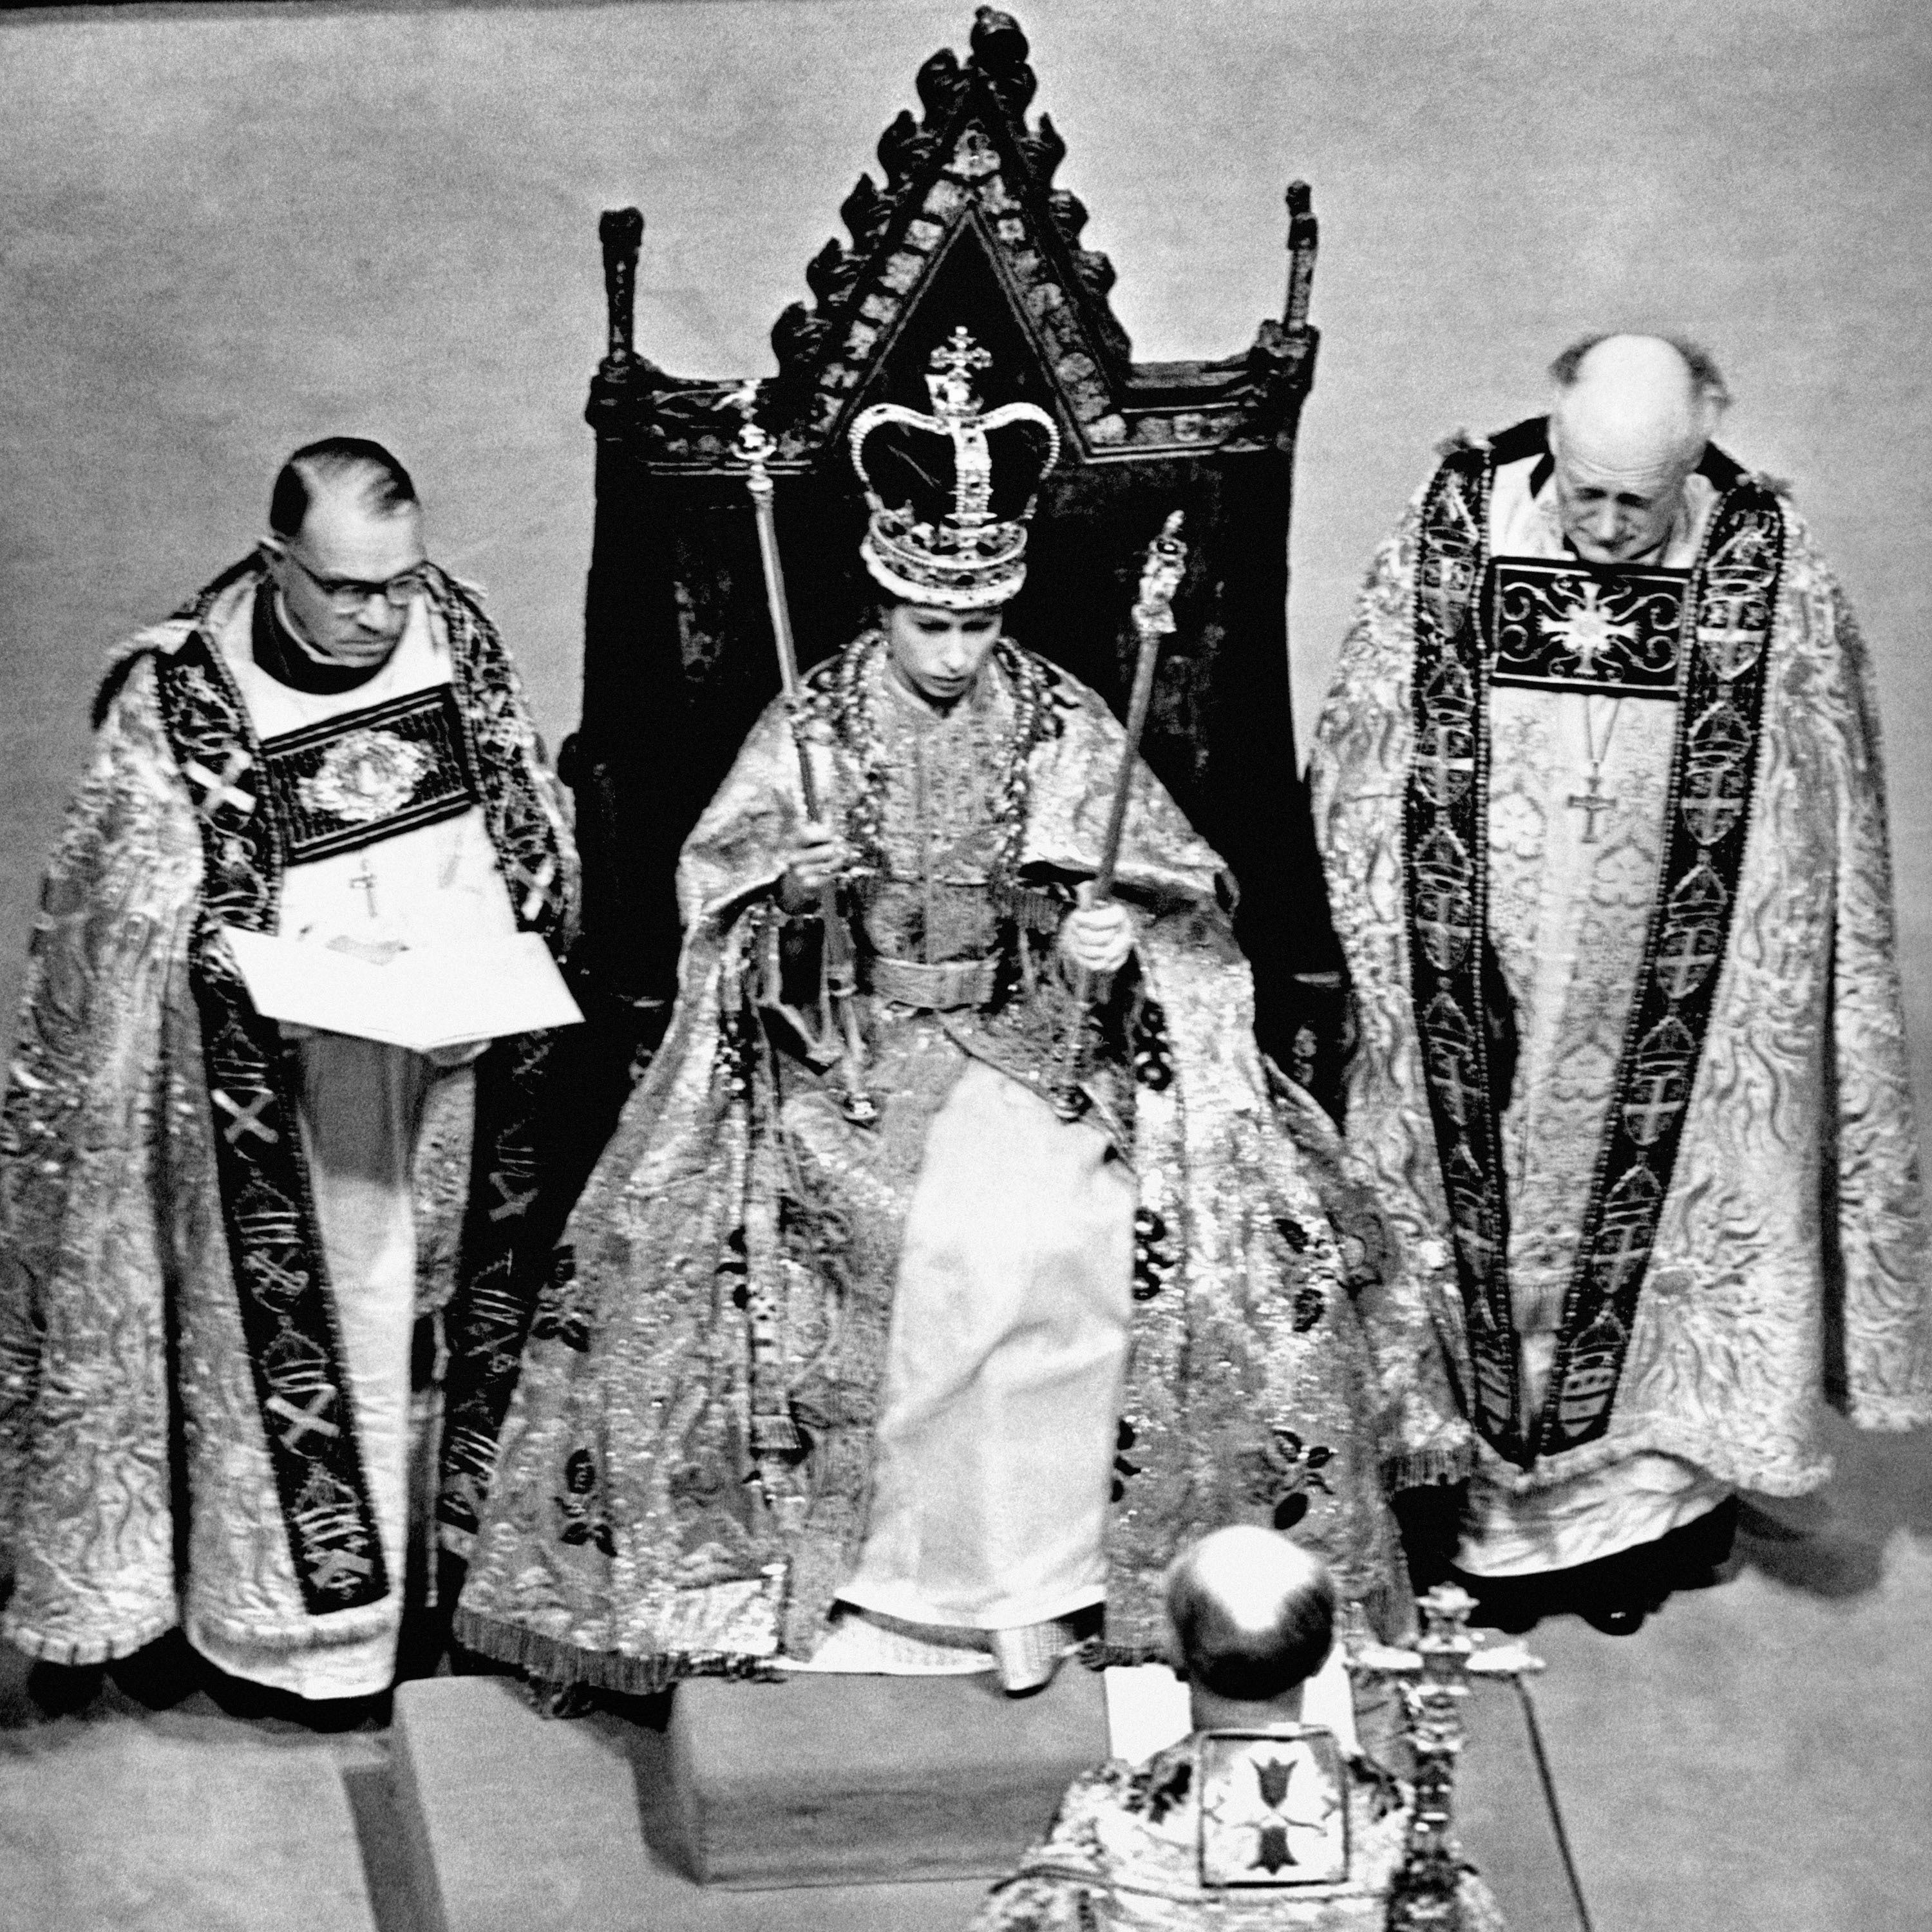 Queen Elizabeth II wearing the St. Edward Crown and carrying the Sceptre and the Rod after her coronation in Westminster Abbey, London